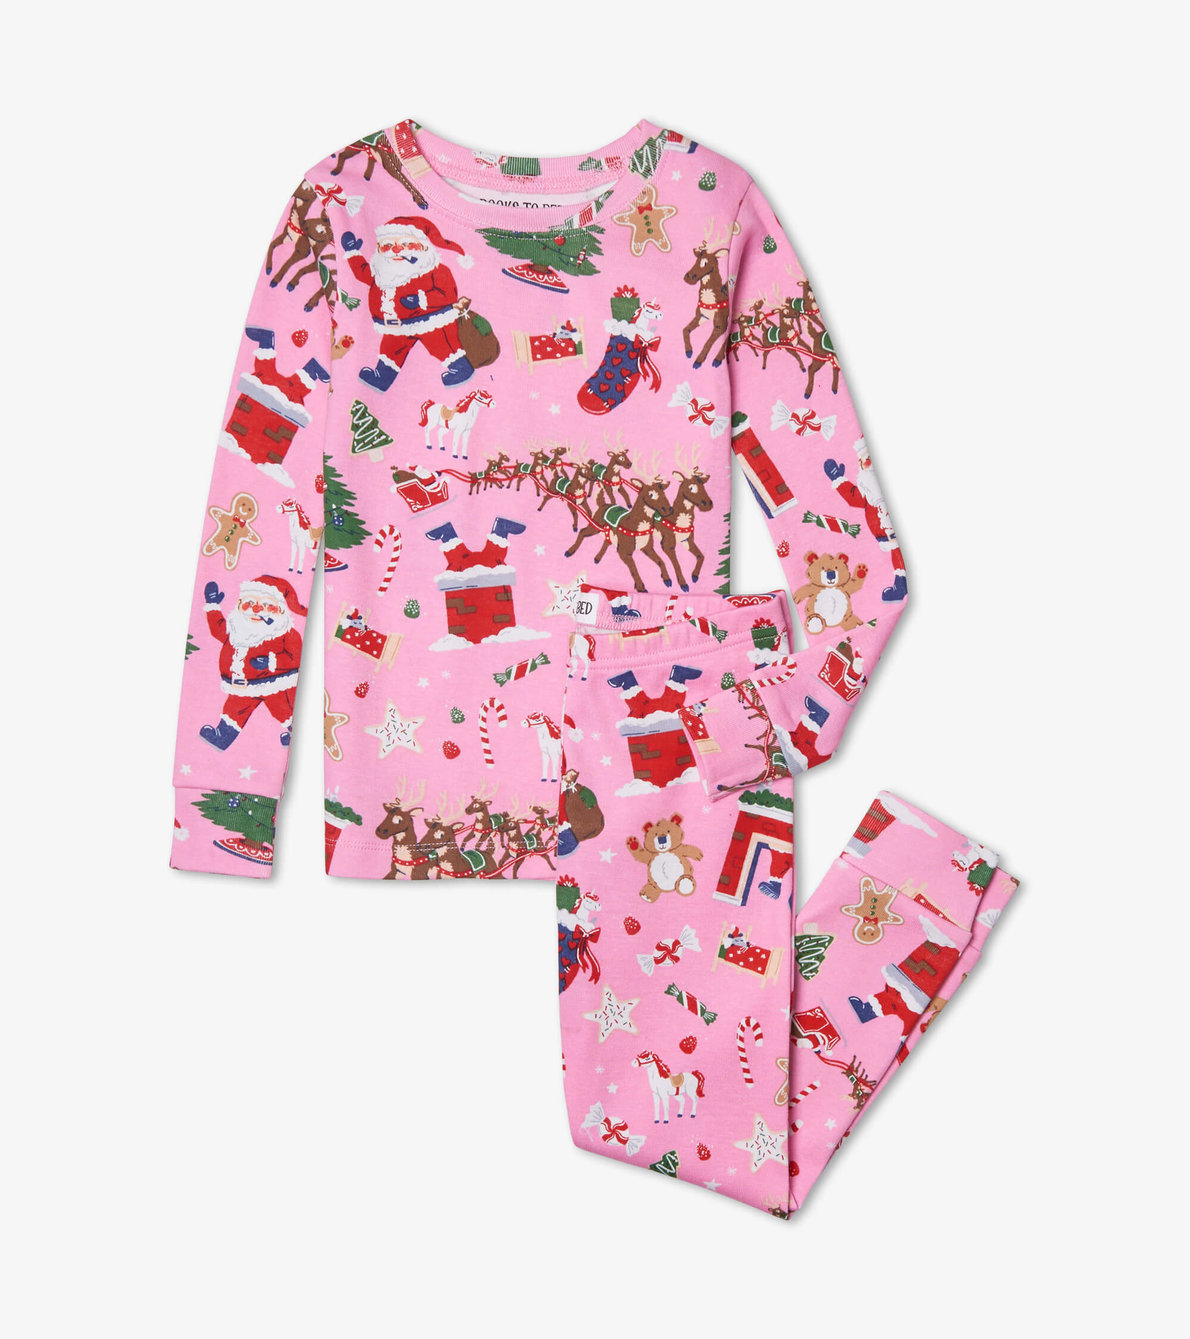 View larger image of Twas the Night Before Christmas Pink Pajama Set